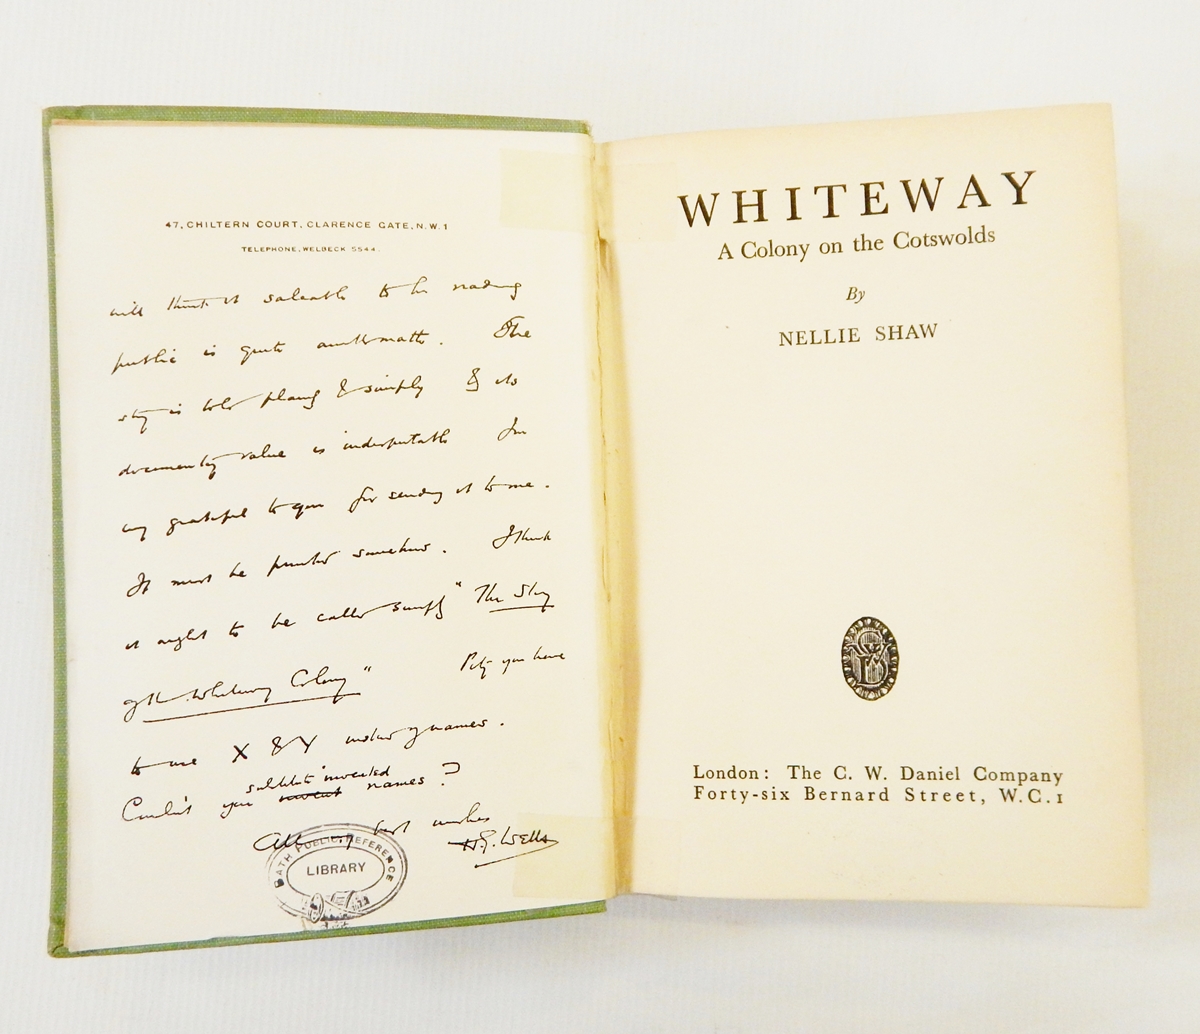 Shaw, Nellie "Whiteway, a Colony on the Cotswolds", photographic ills,